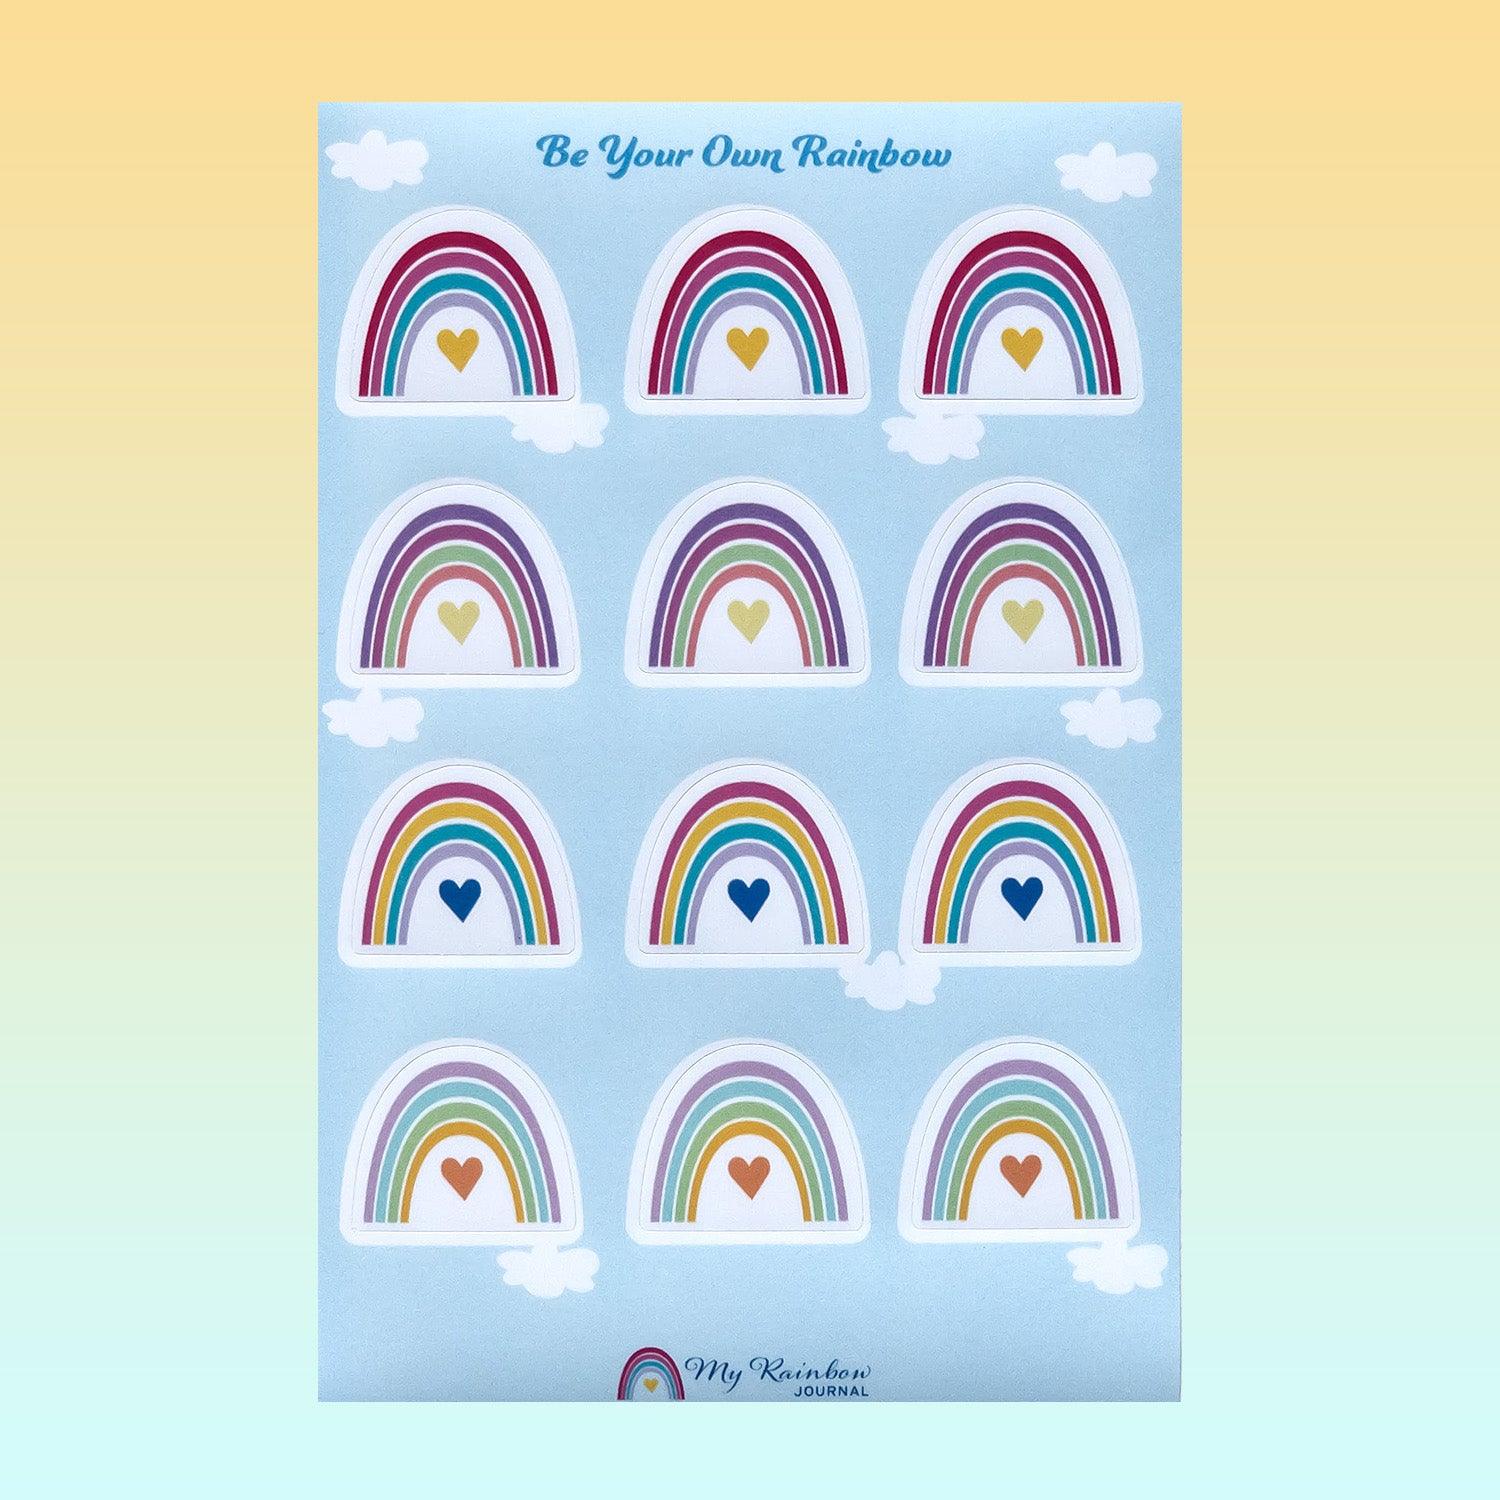 The Be Your Own Rainbow Gift Bundle